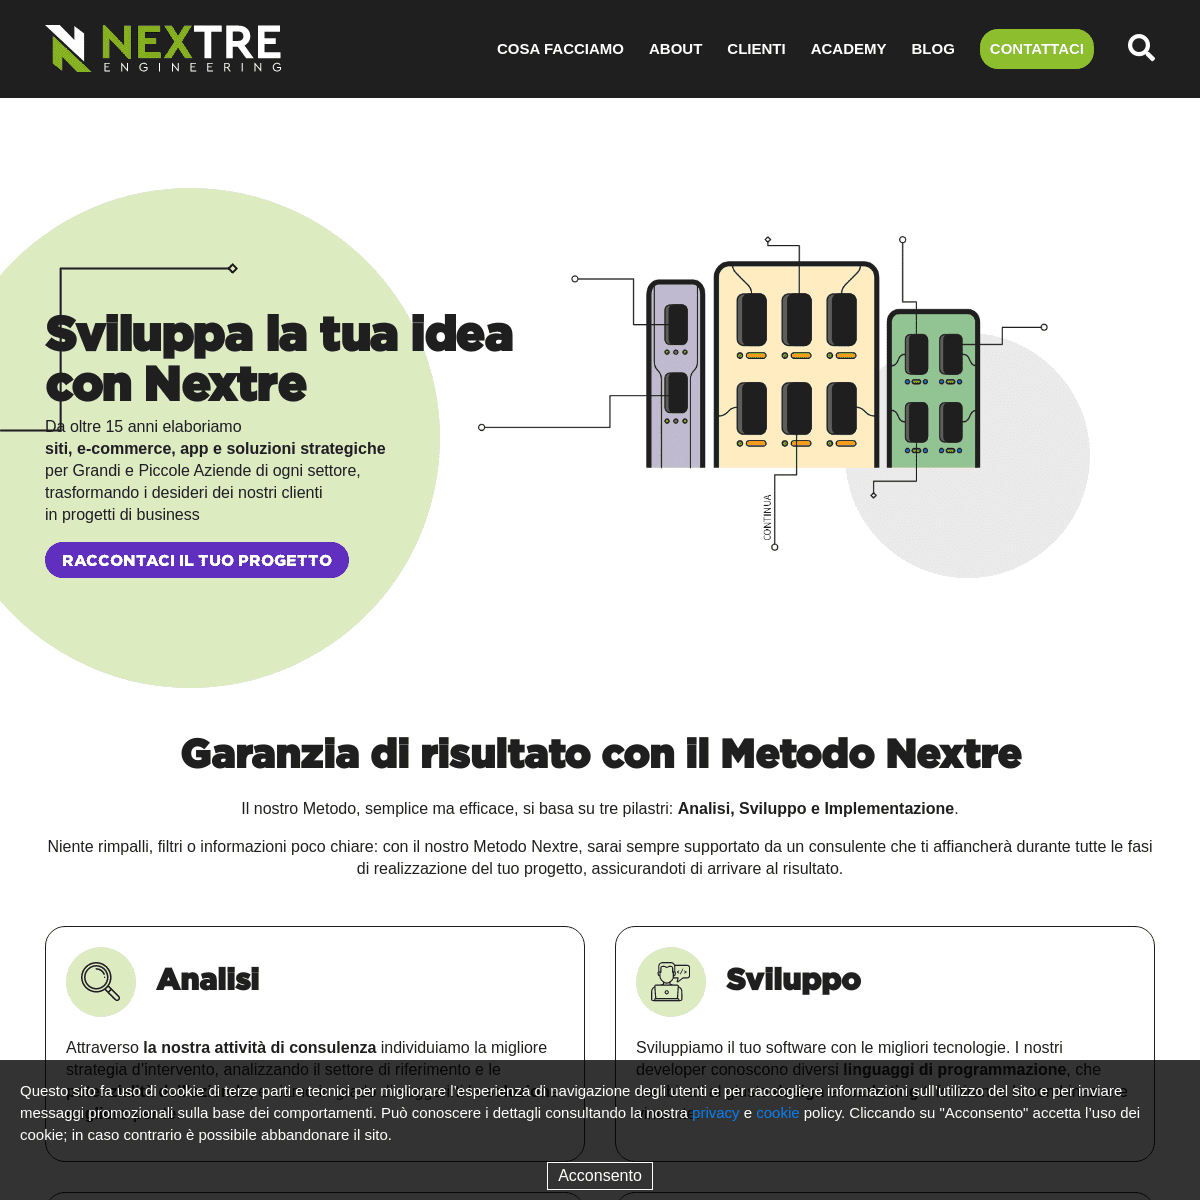 A complete backup of https://nextre.it